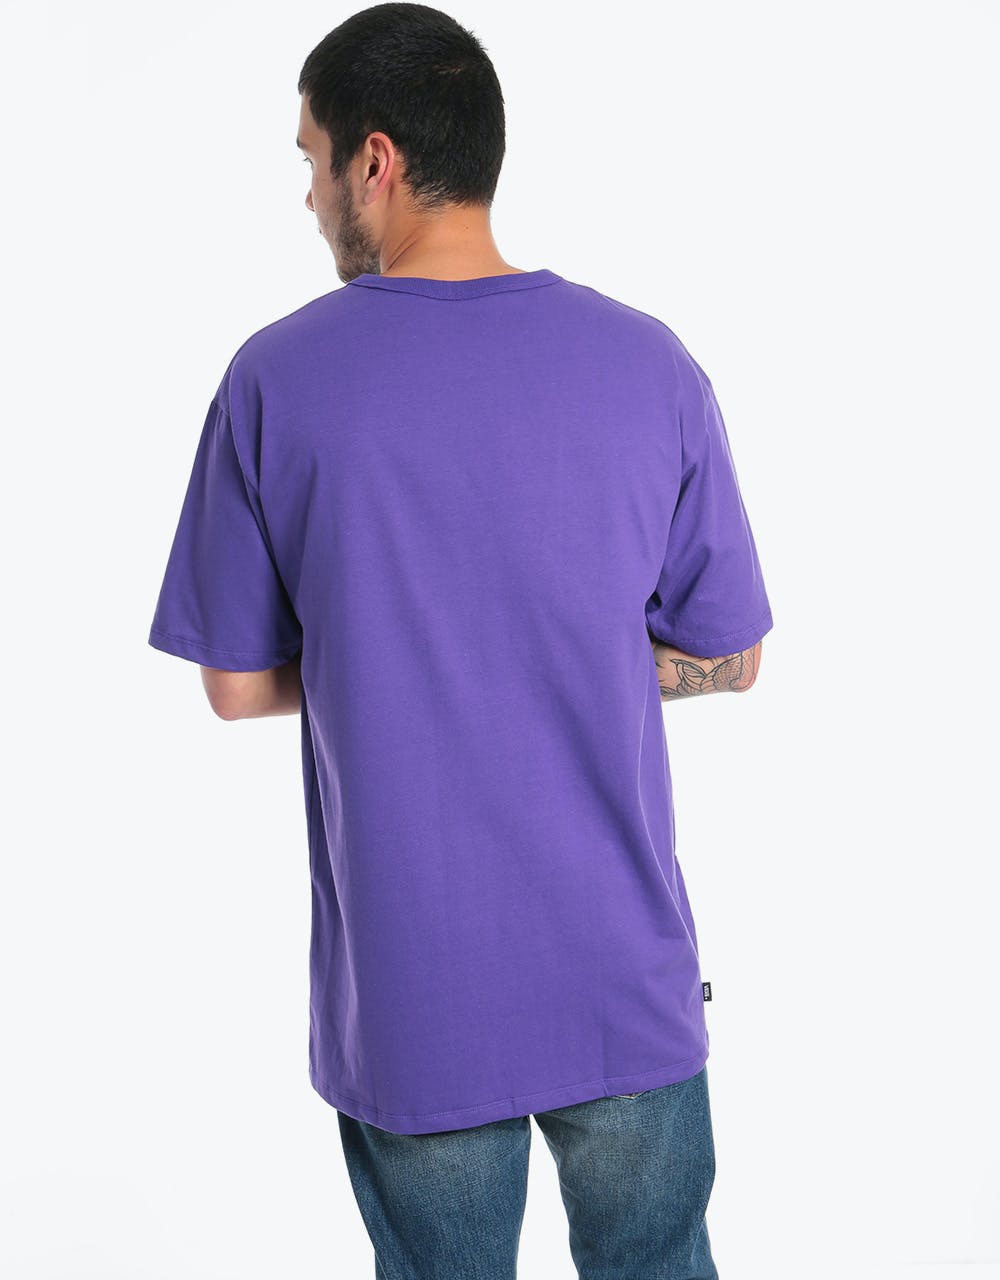 Vans Off The Wall Classic T-Shirt - Heliotrope